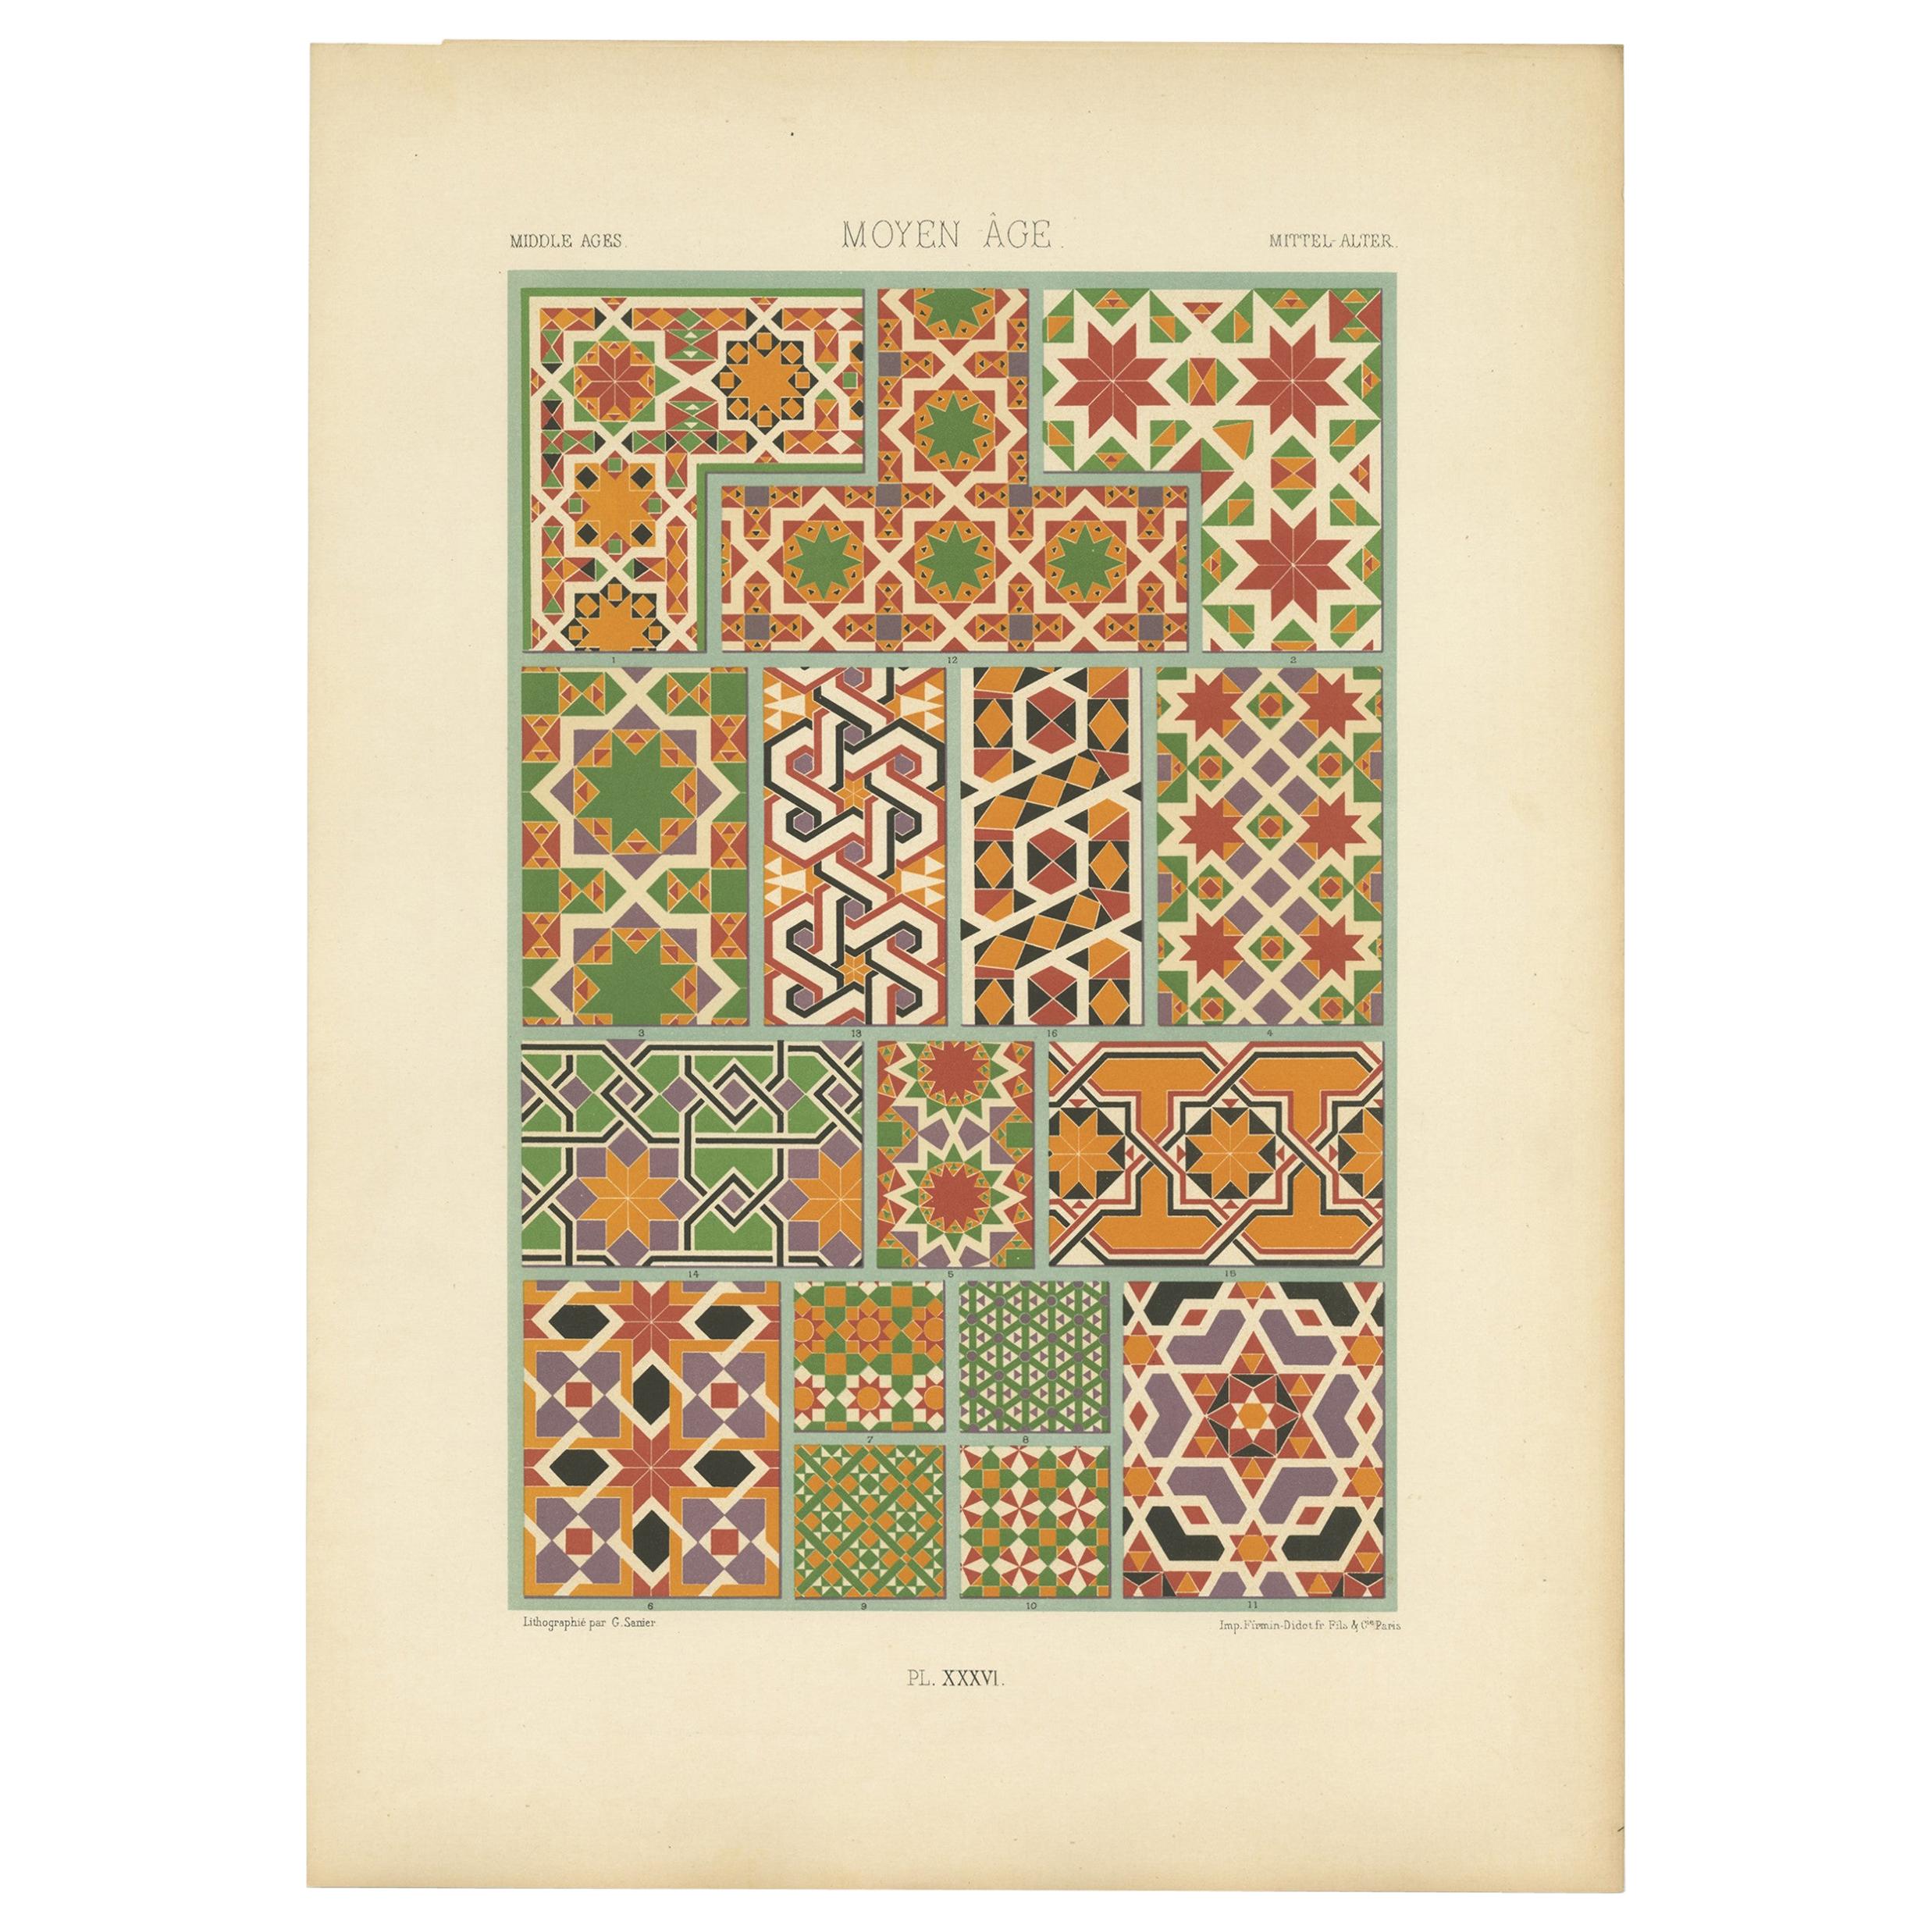 Pl. 36 Antique Print of Middles Ages Ornaments by Racinet (c.1890) For Sale